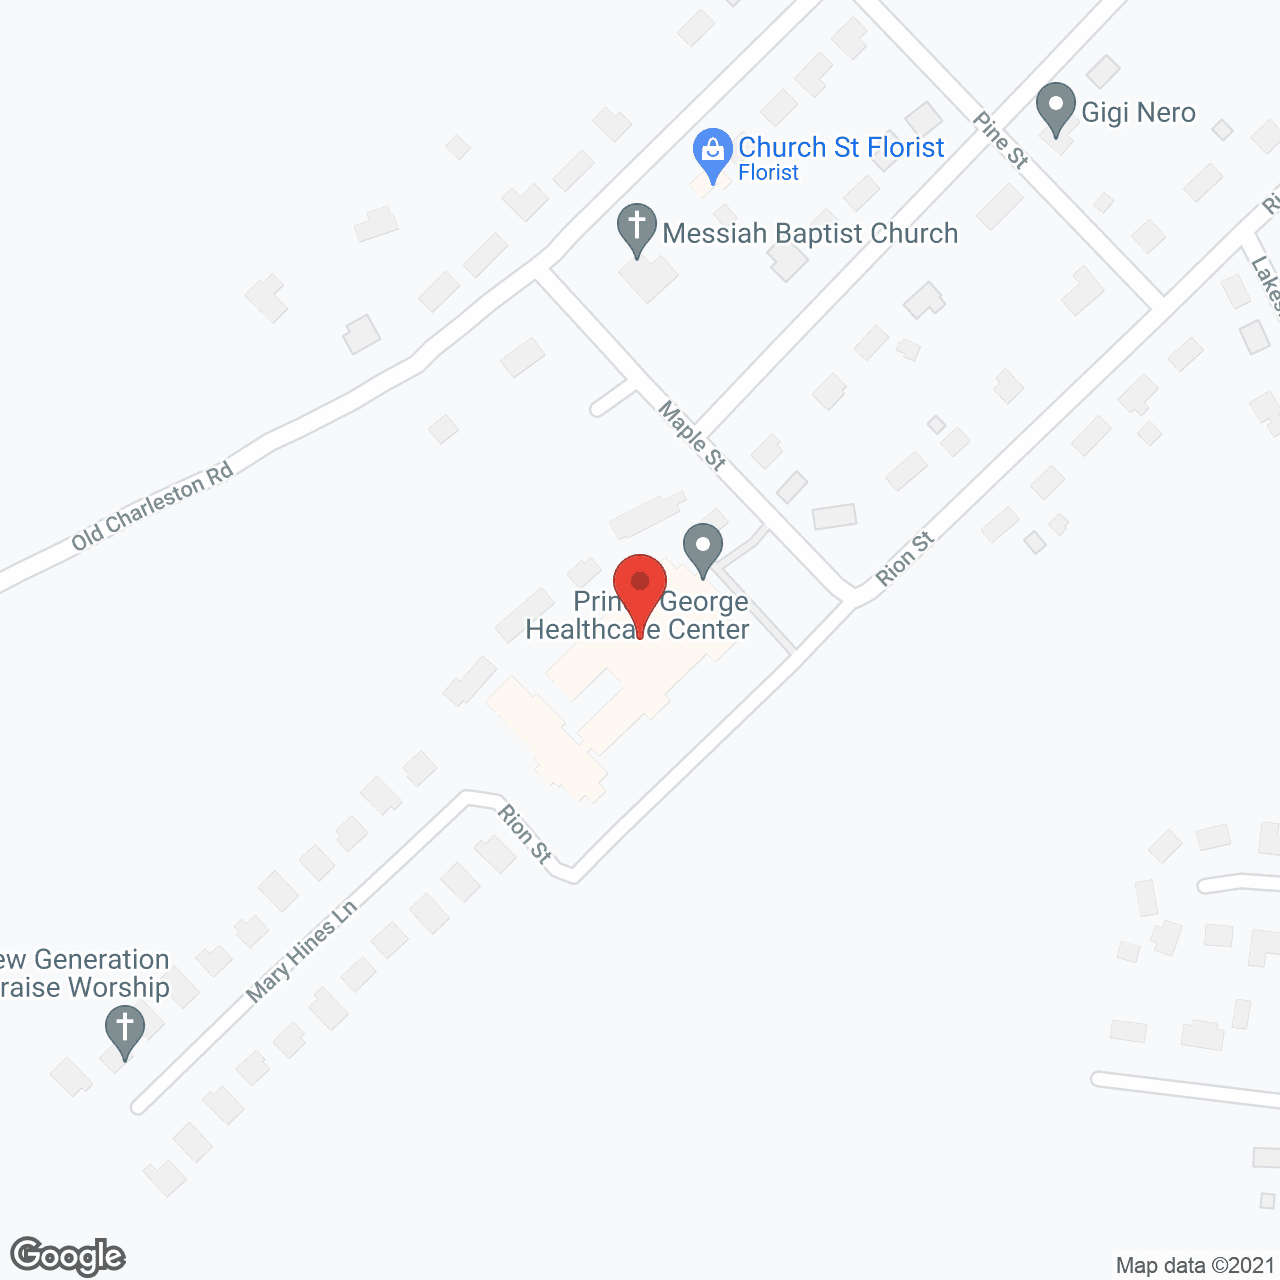 Prince George Healthcare Ctr in google map